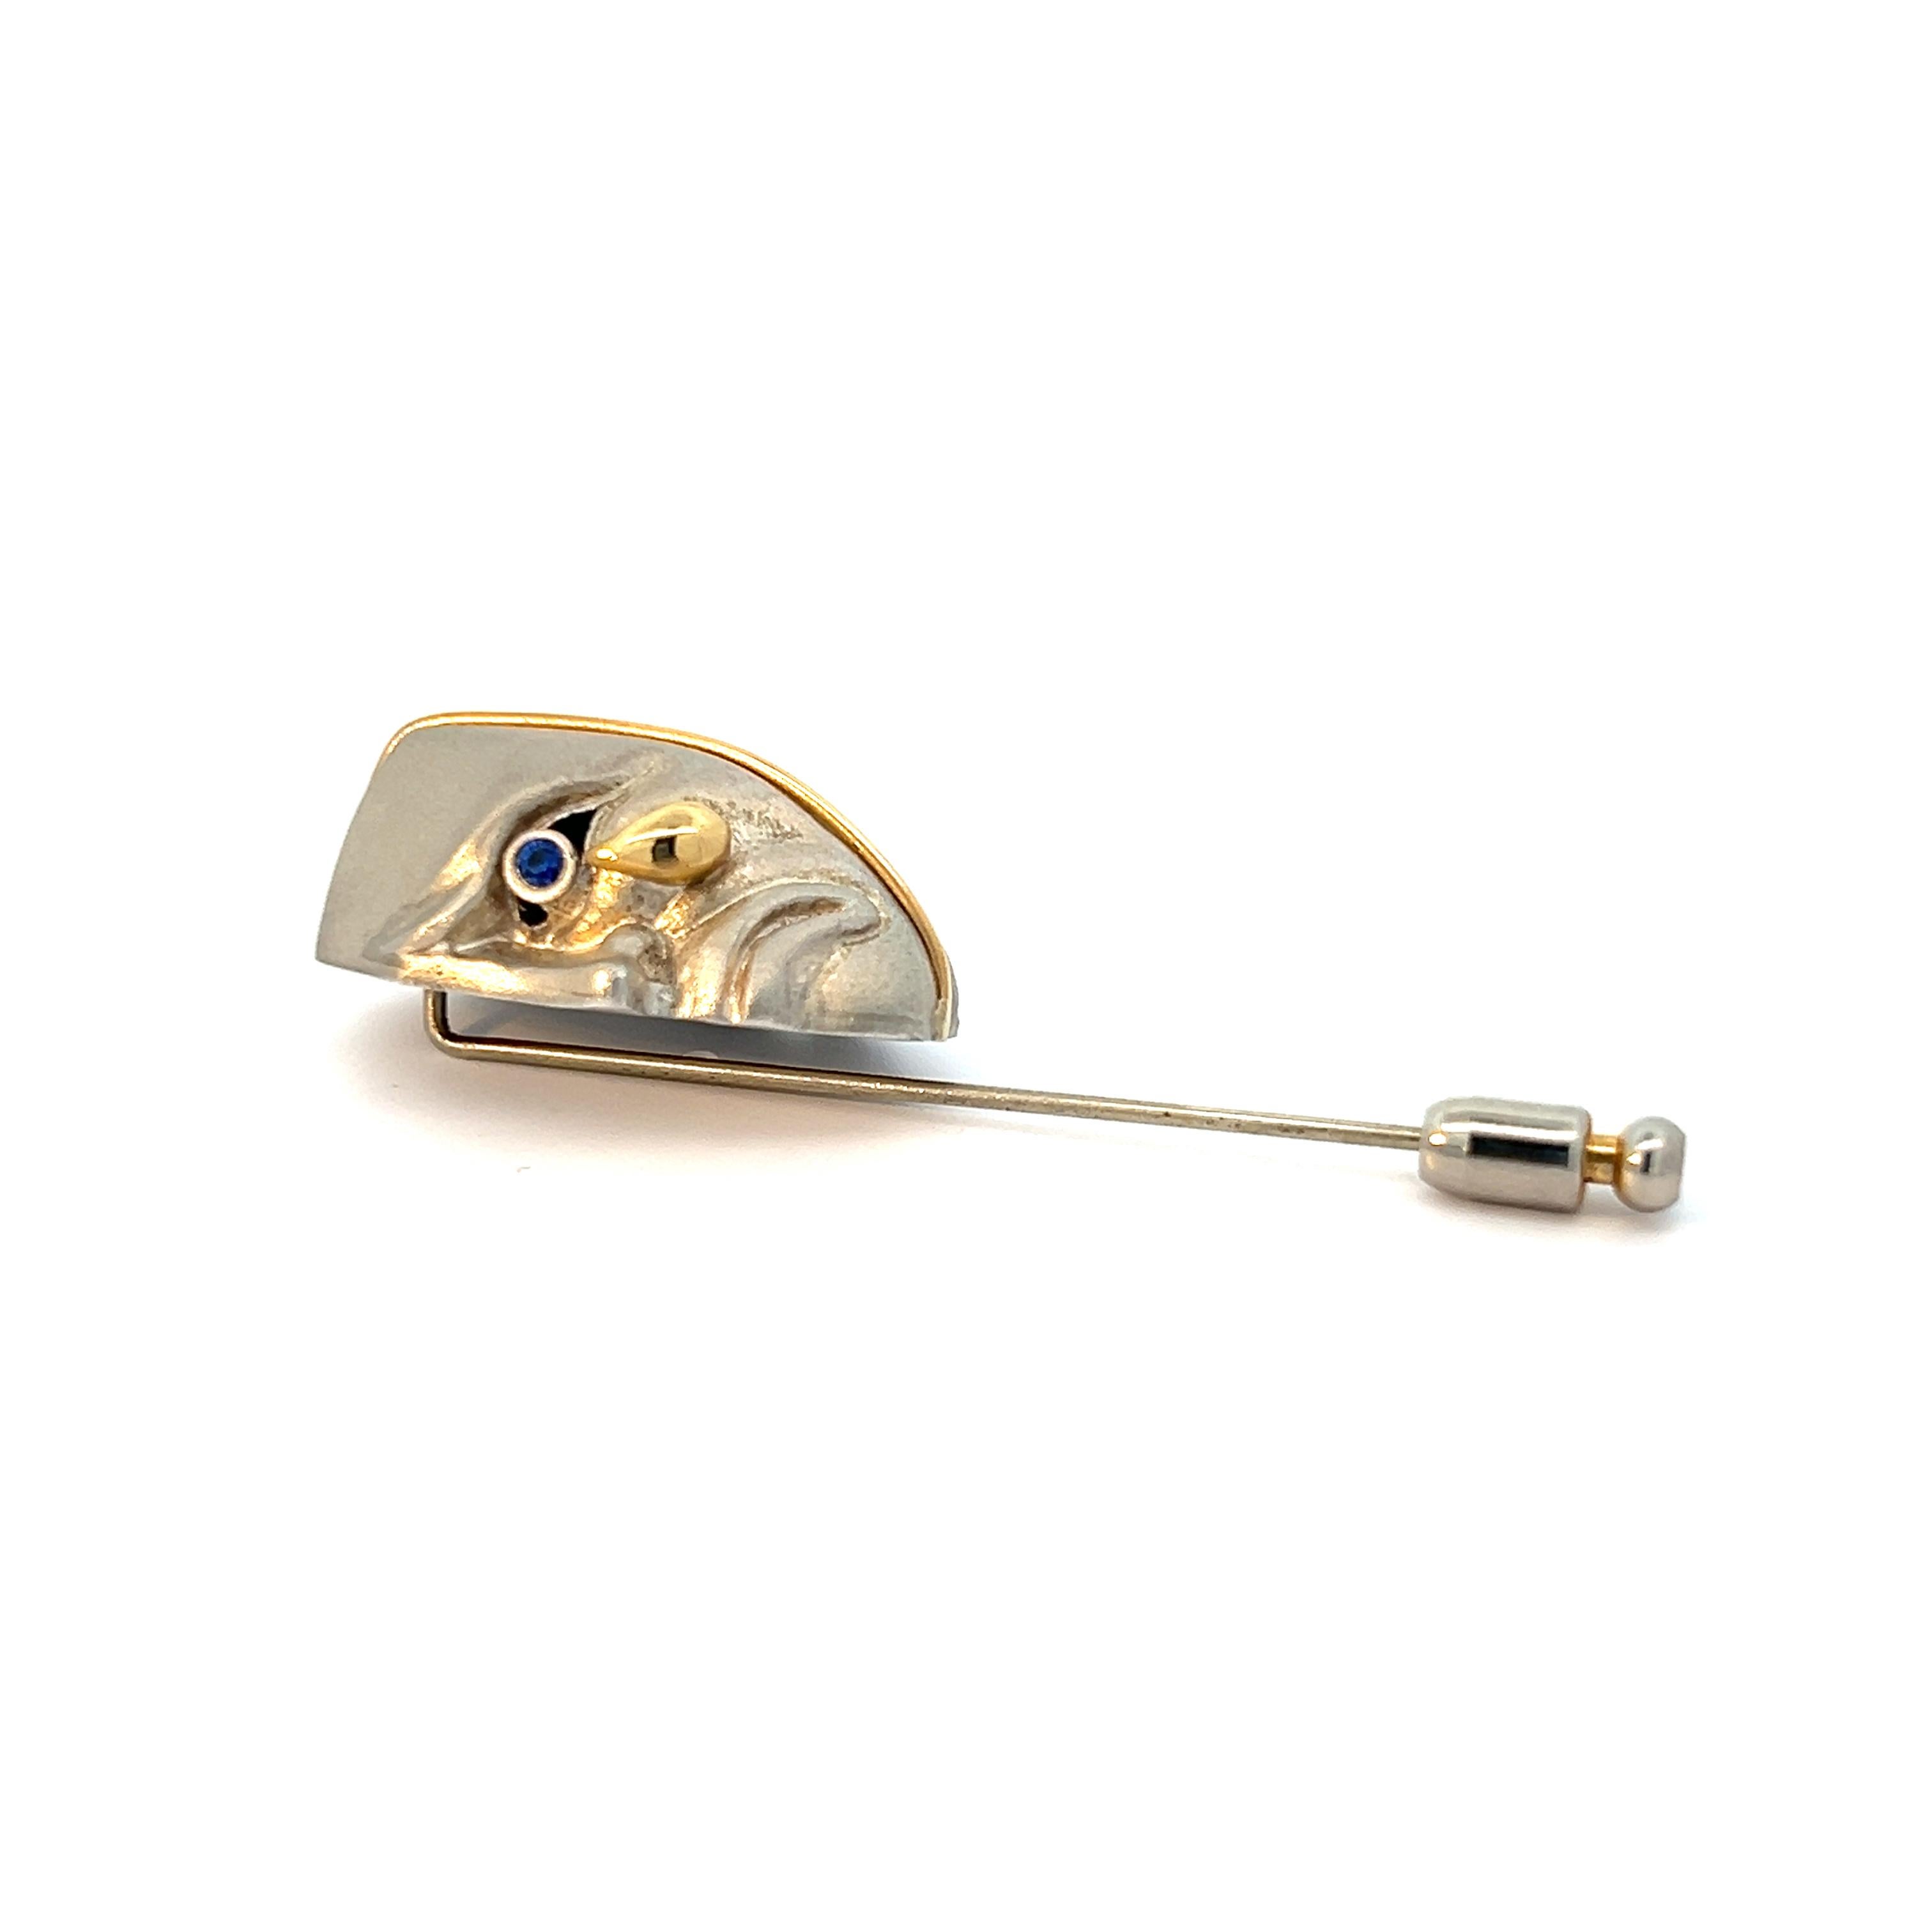 In the heart of this intricately crafted stick pin lies a captivating tale of both joy and sorrow, spun into the very essence of its design. Fashioned from the noble metals of sterling silver and 18k yellow gold, this piece embodies a striking